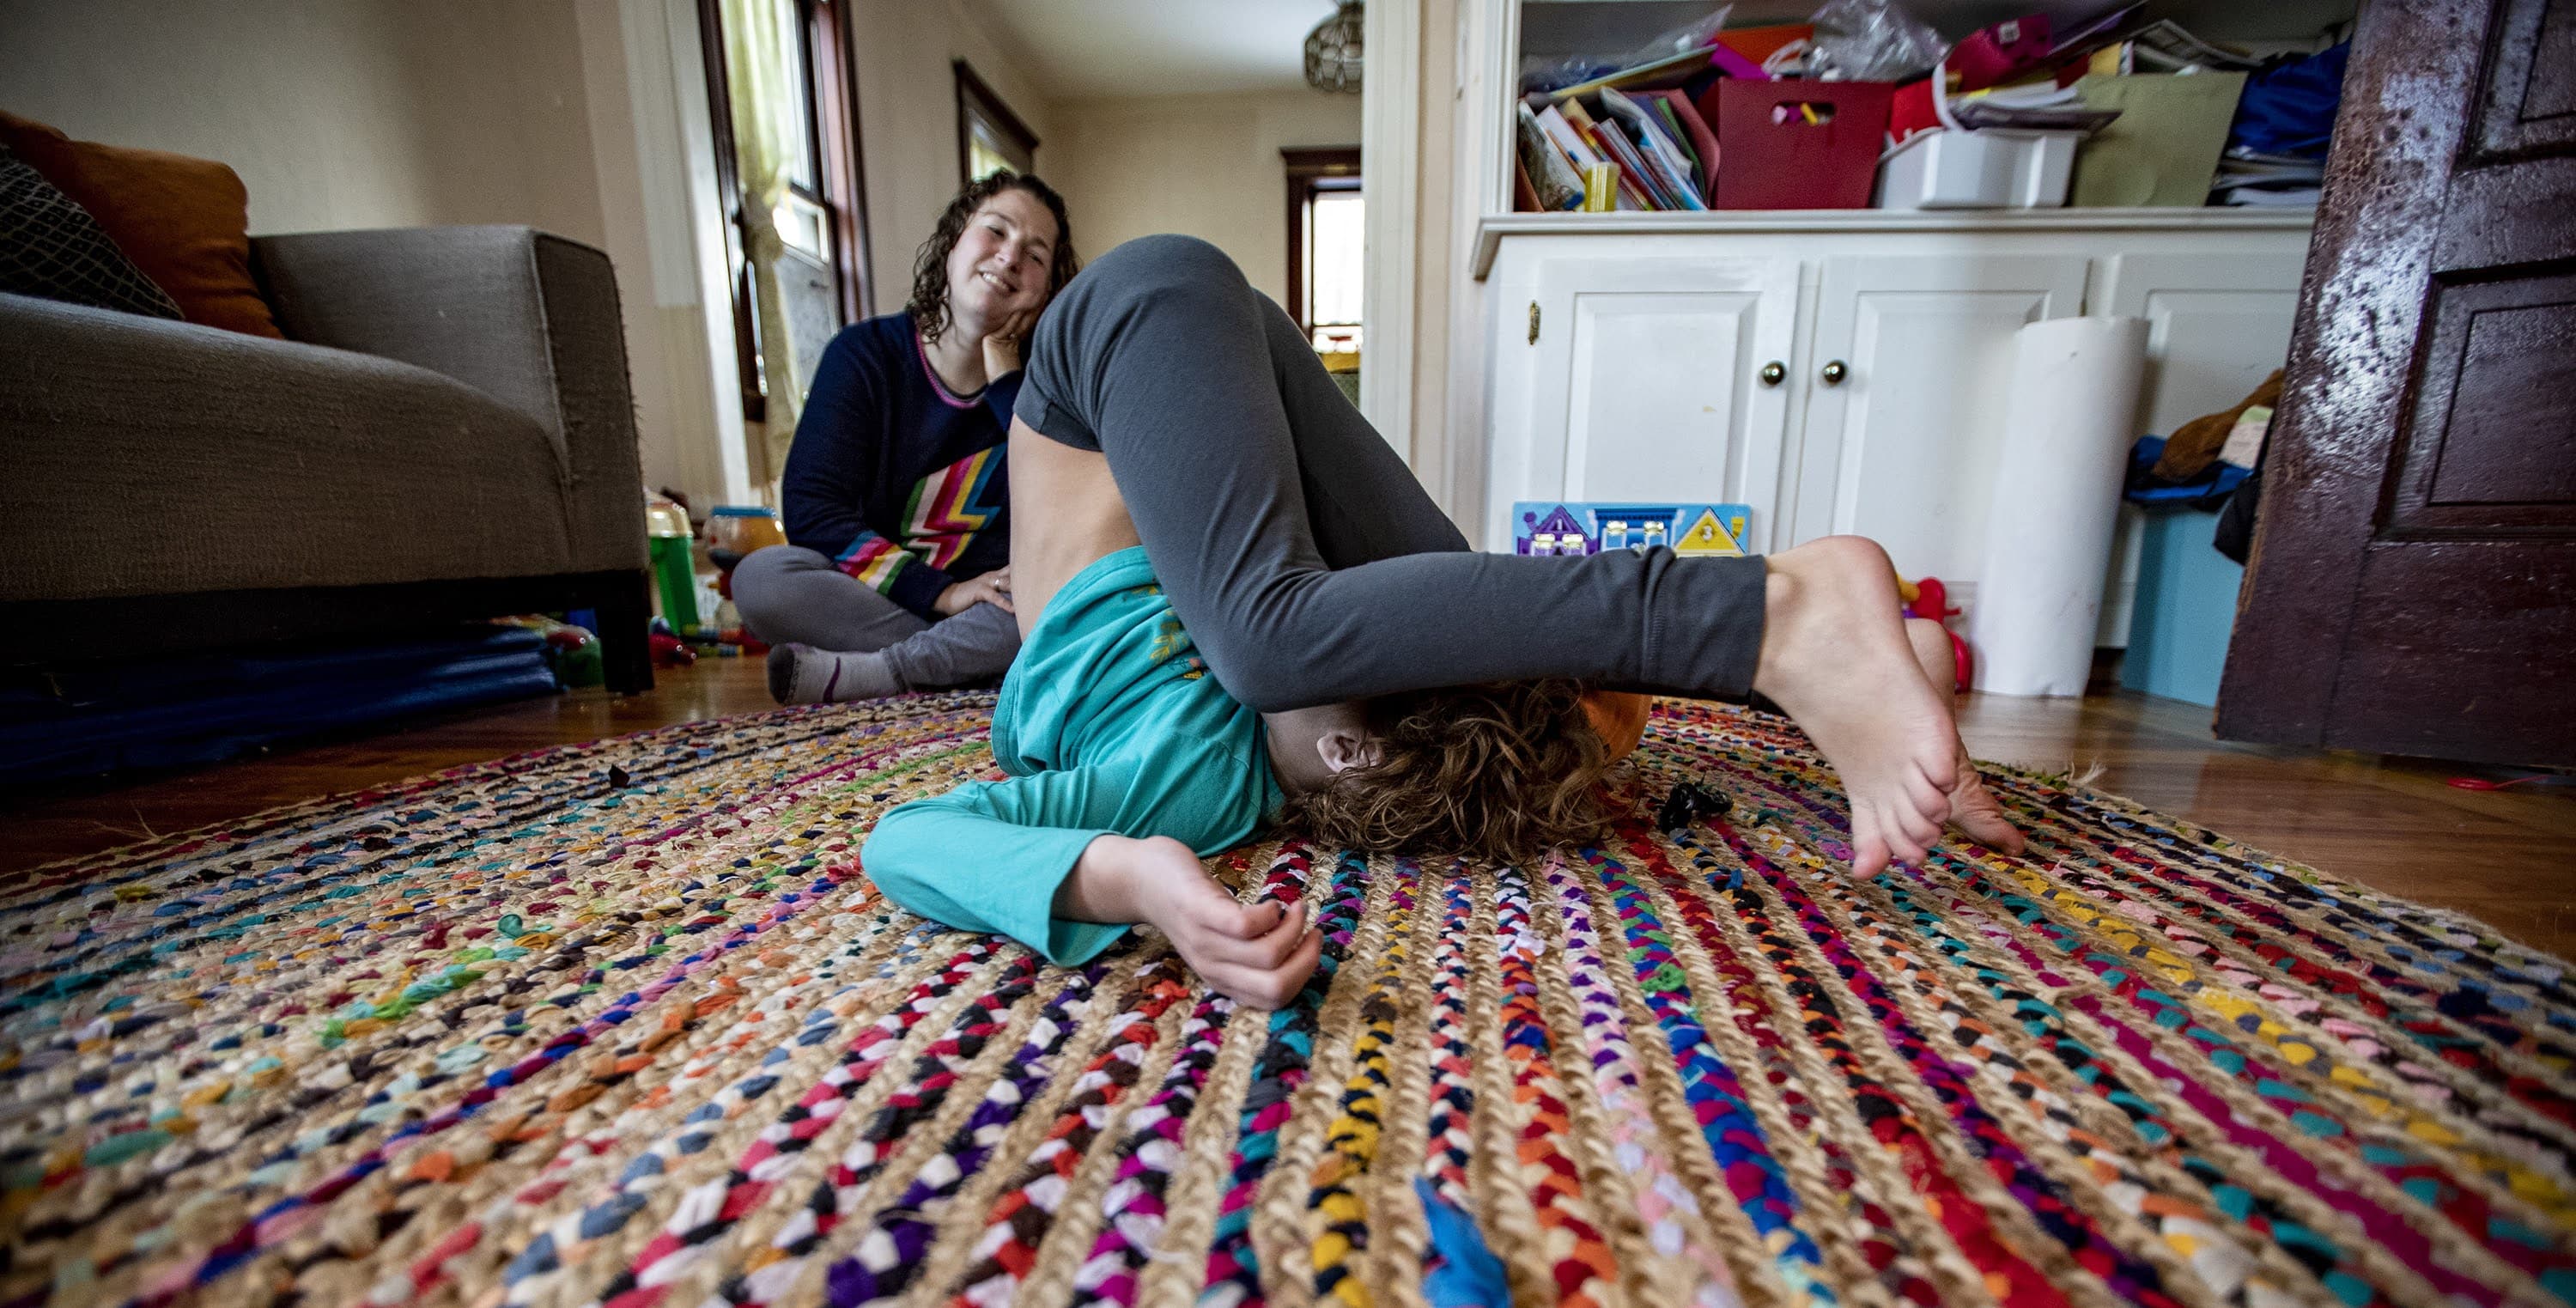 Hallel does a backwards roll in the living room as their mother watches. (Jesse Costa/WBUR)